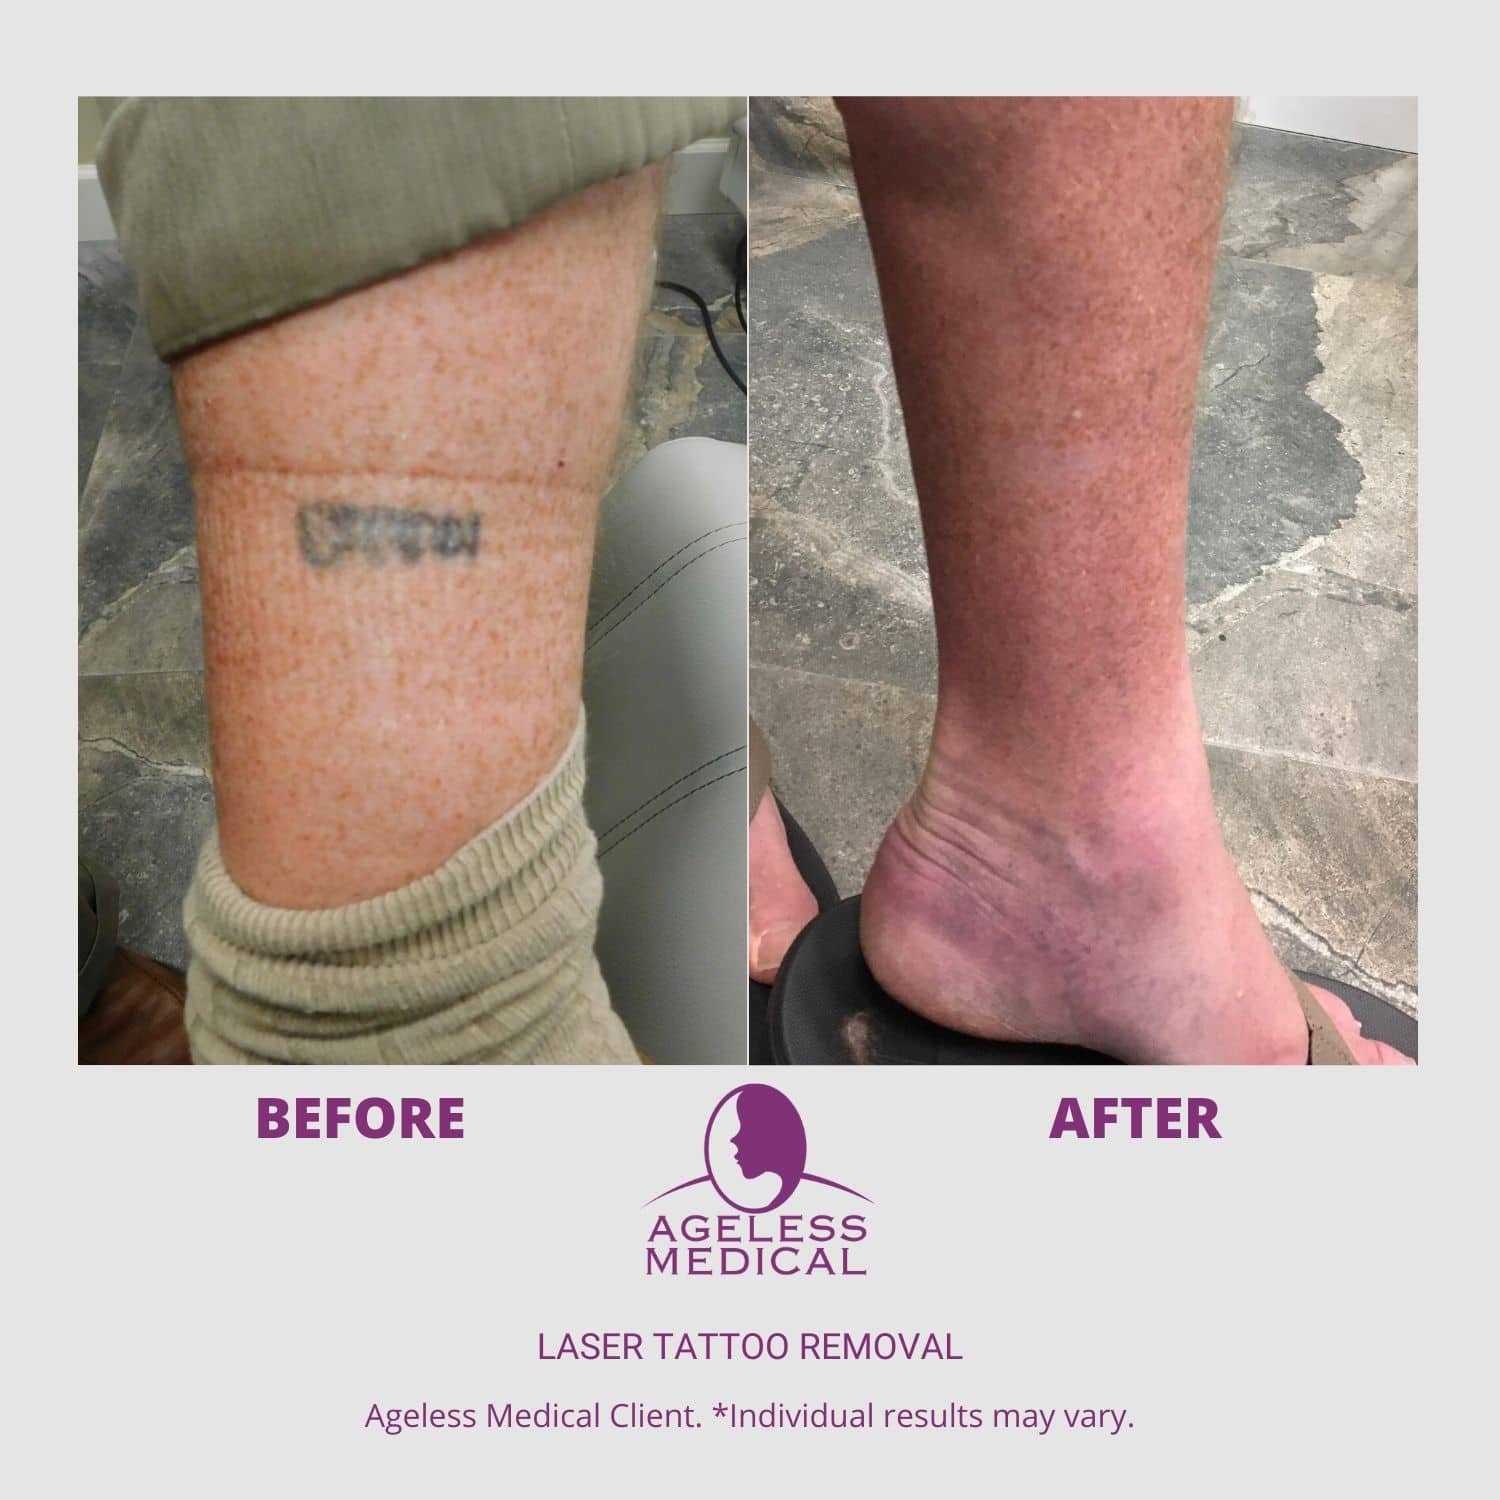 Does Laser Tattoo Removal Leave Scars?  